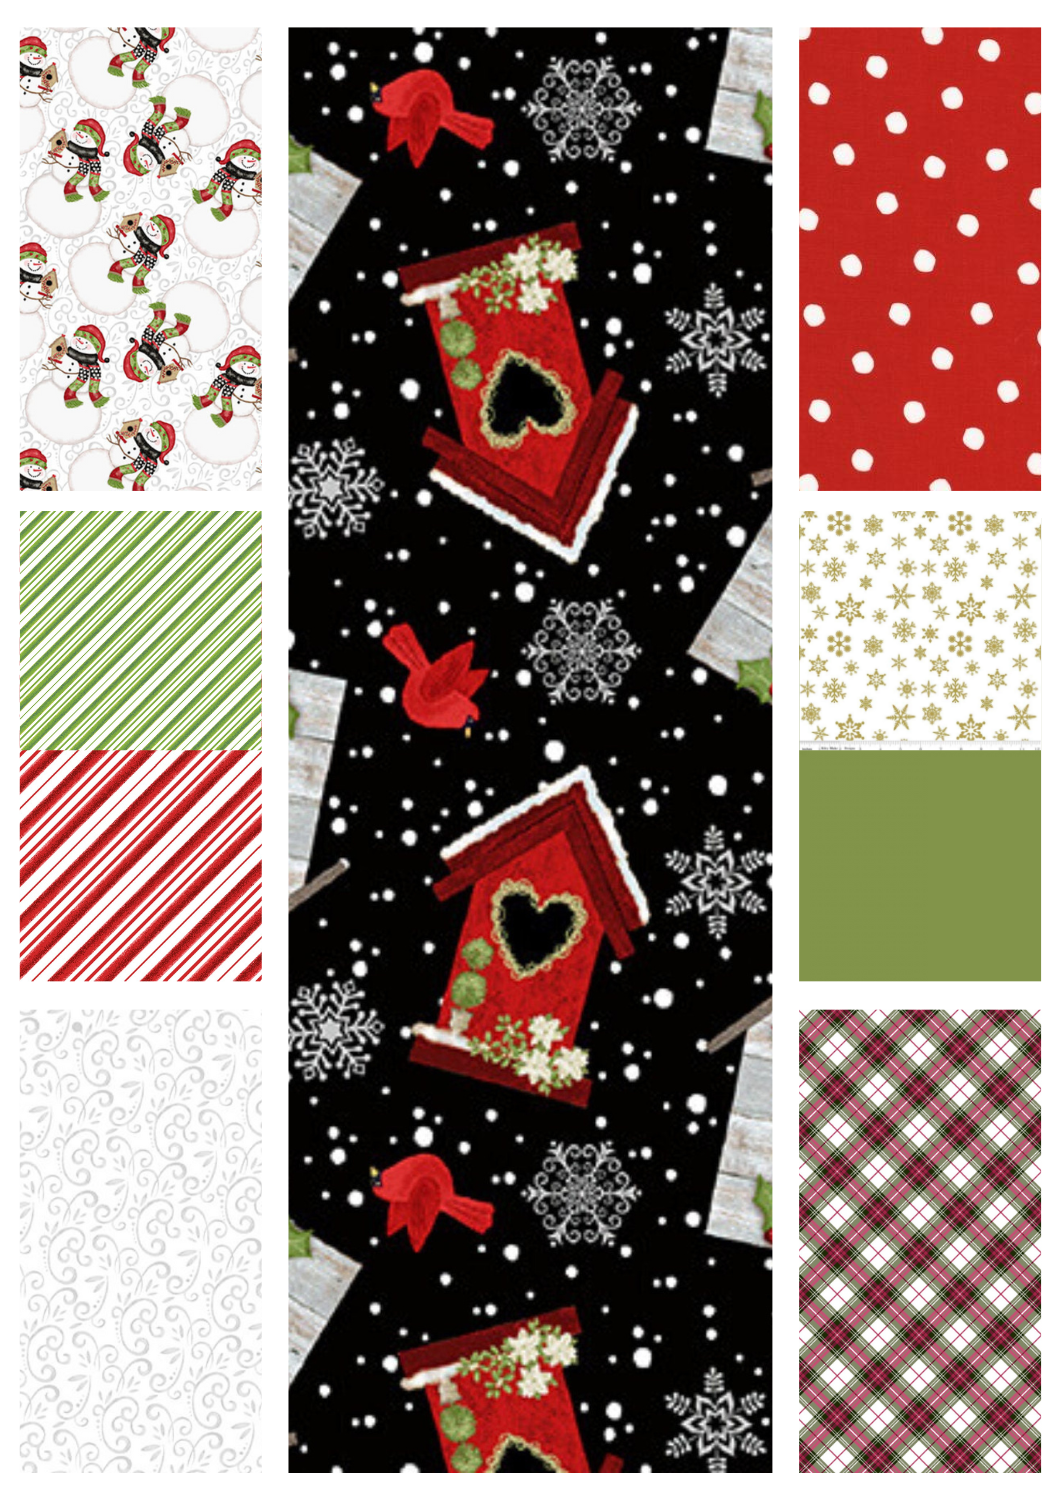 Angels Neverland Quilt Kit Christmas Quilt Kits with Snow Place Like Home Birdhouse Theme